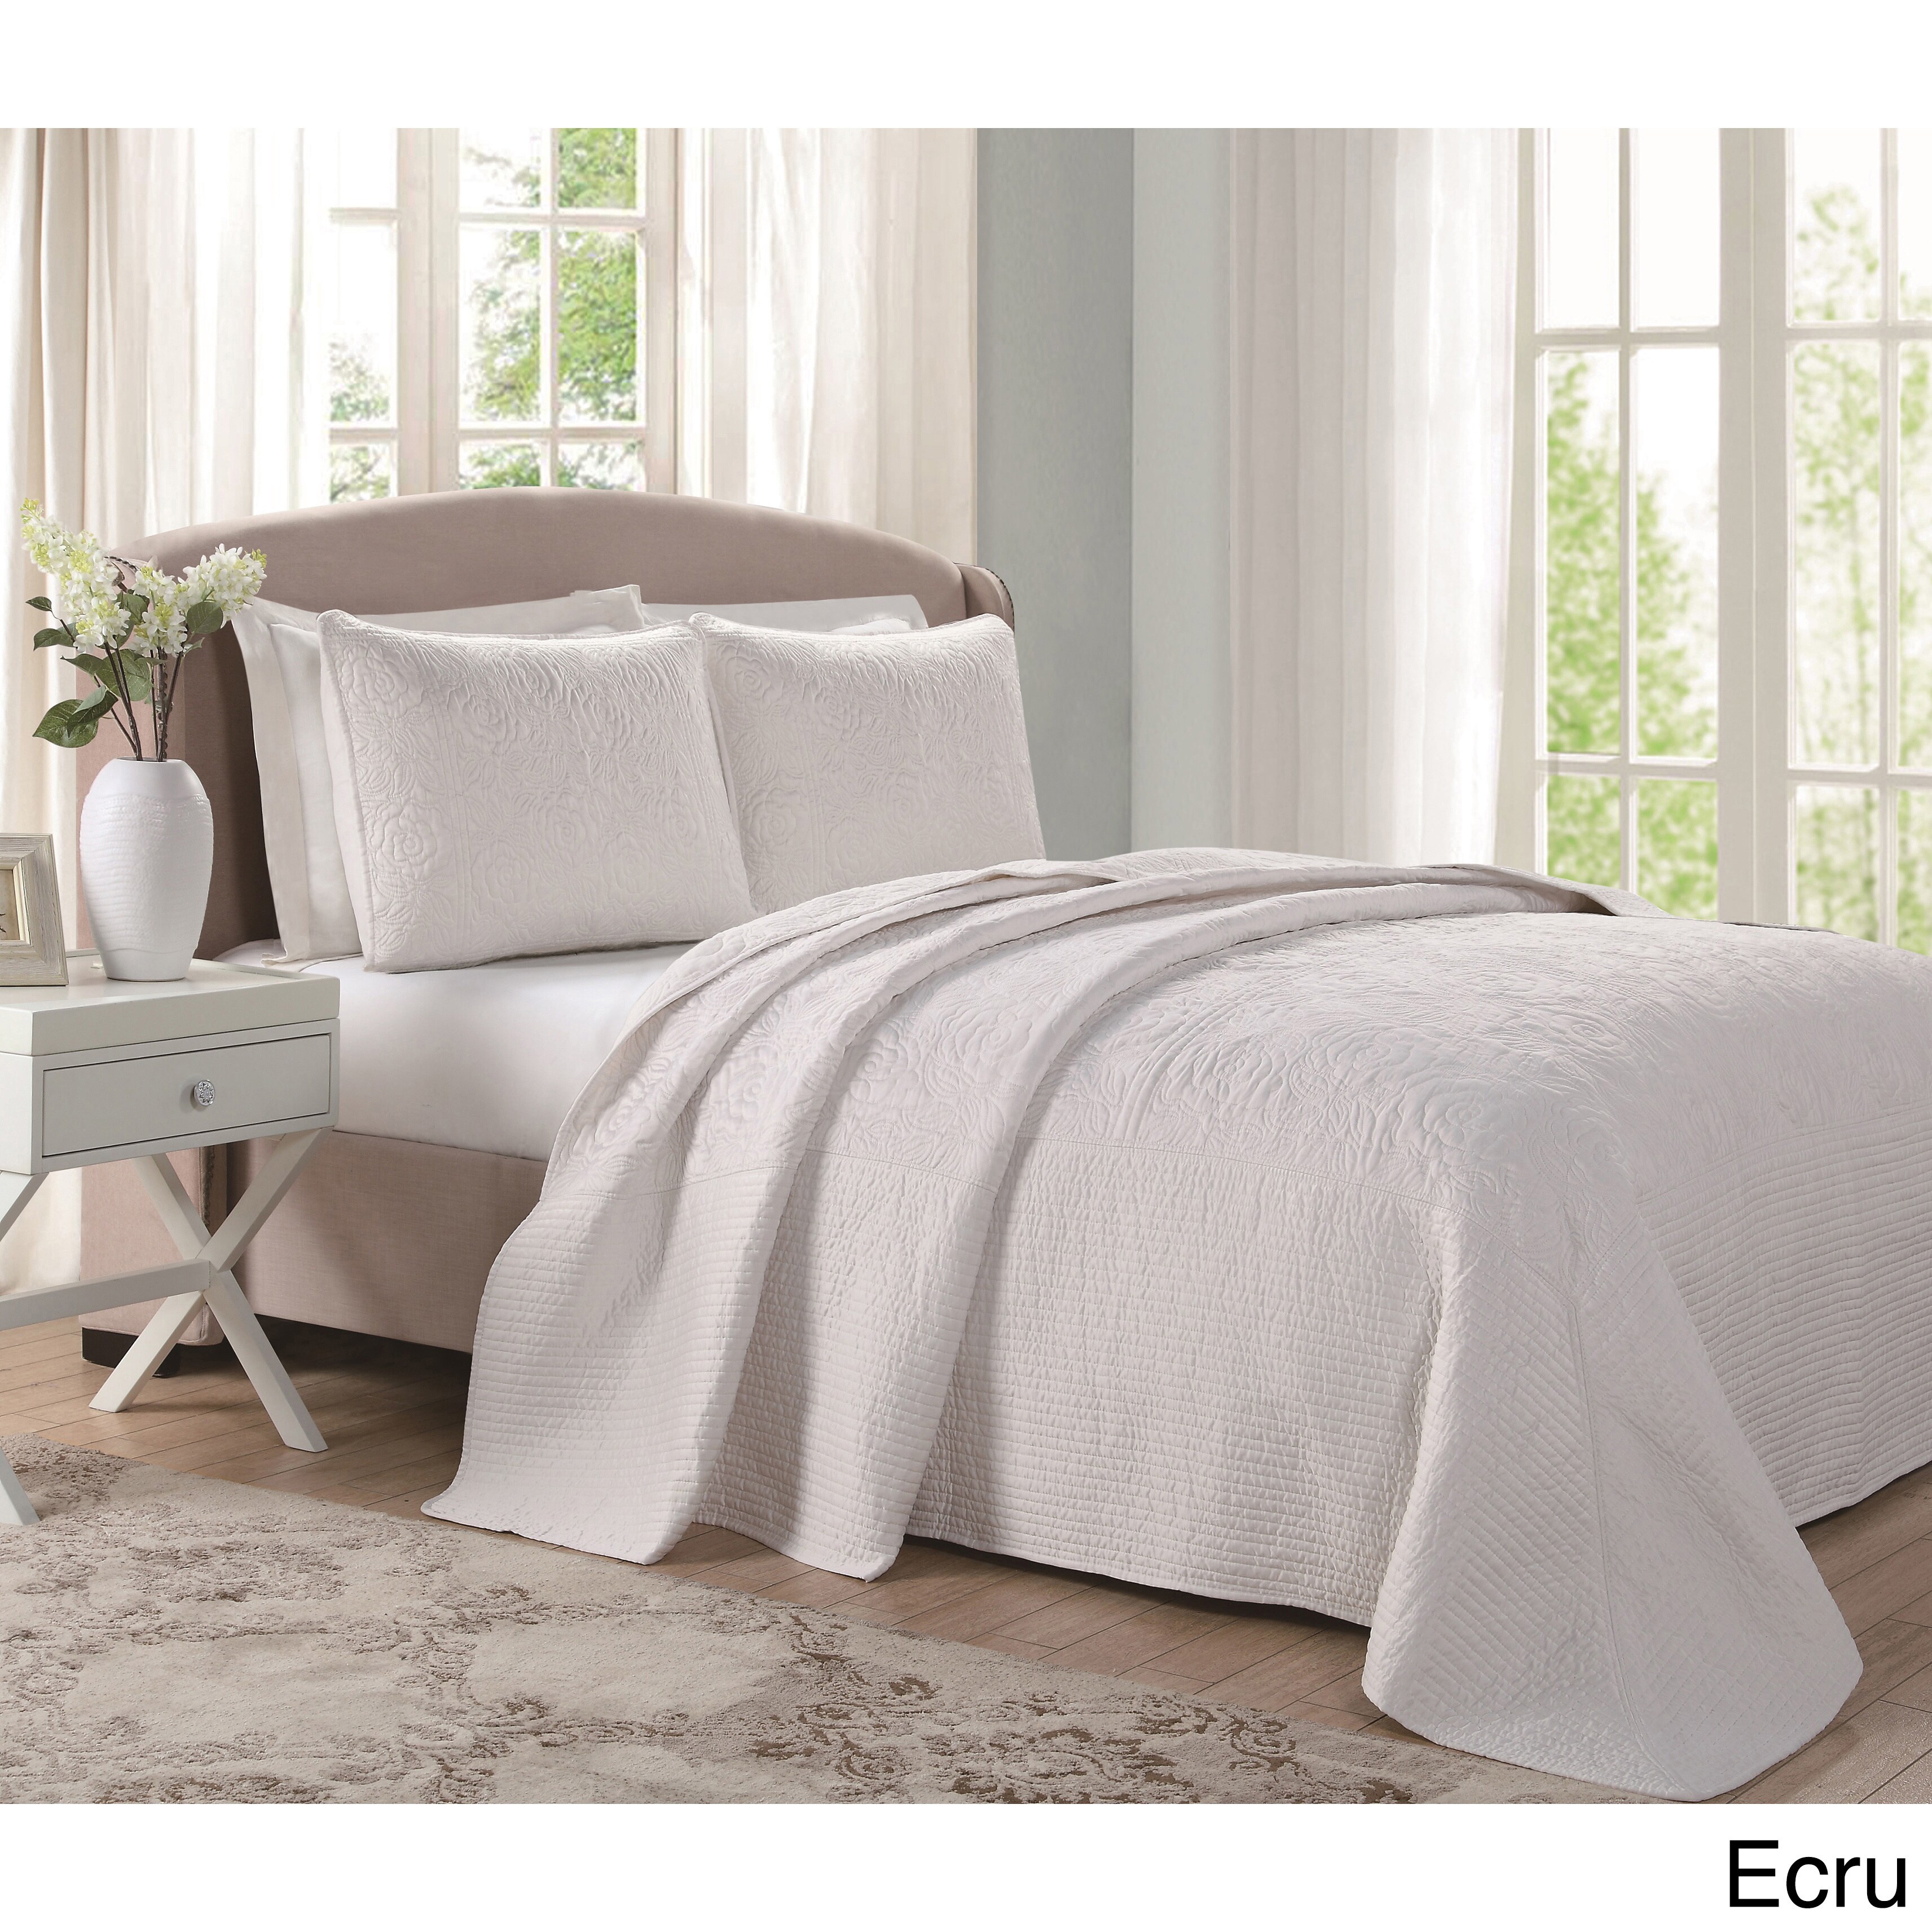 Shop Laura Ashley Silky Satin Quilted Bedspread Overstock 12032875